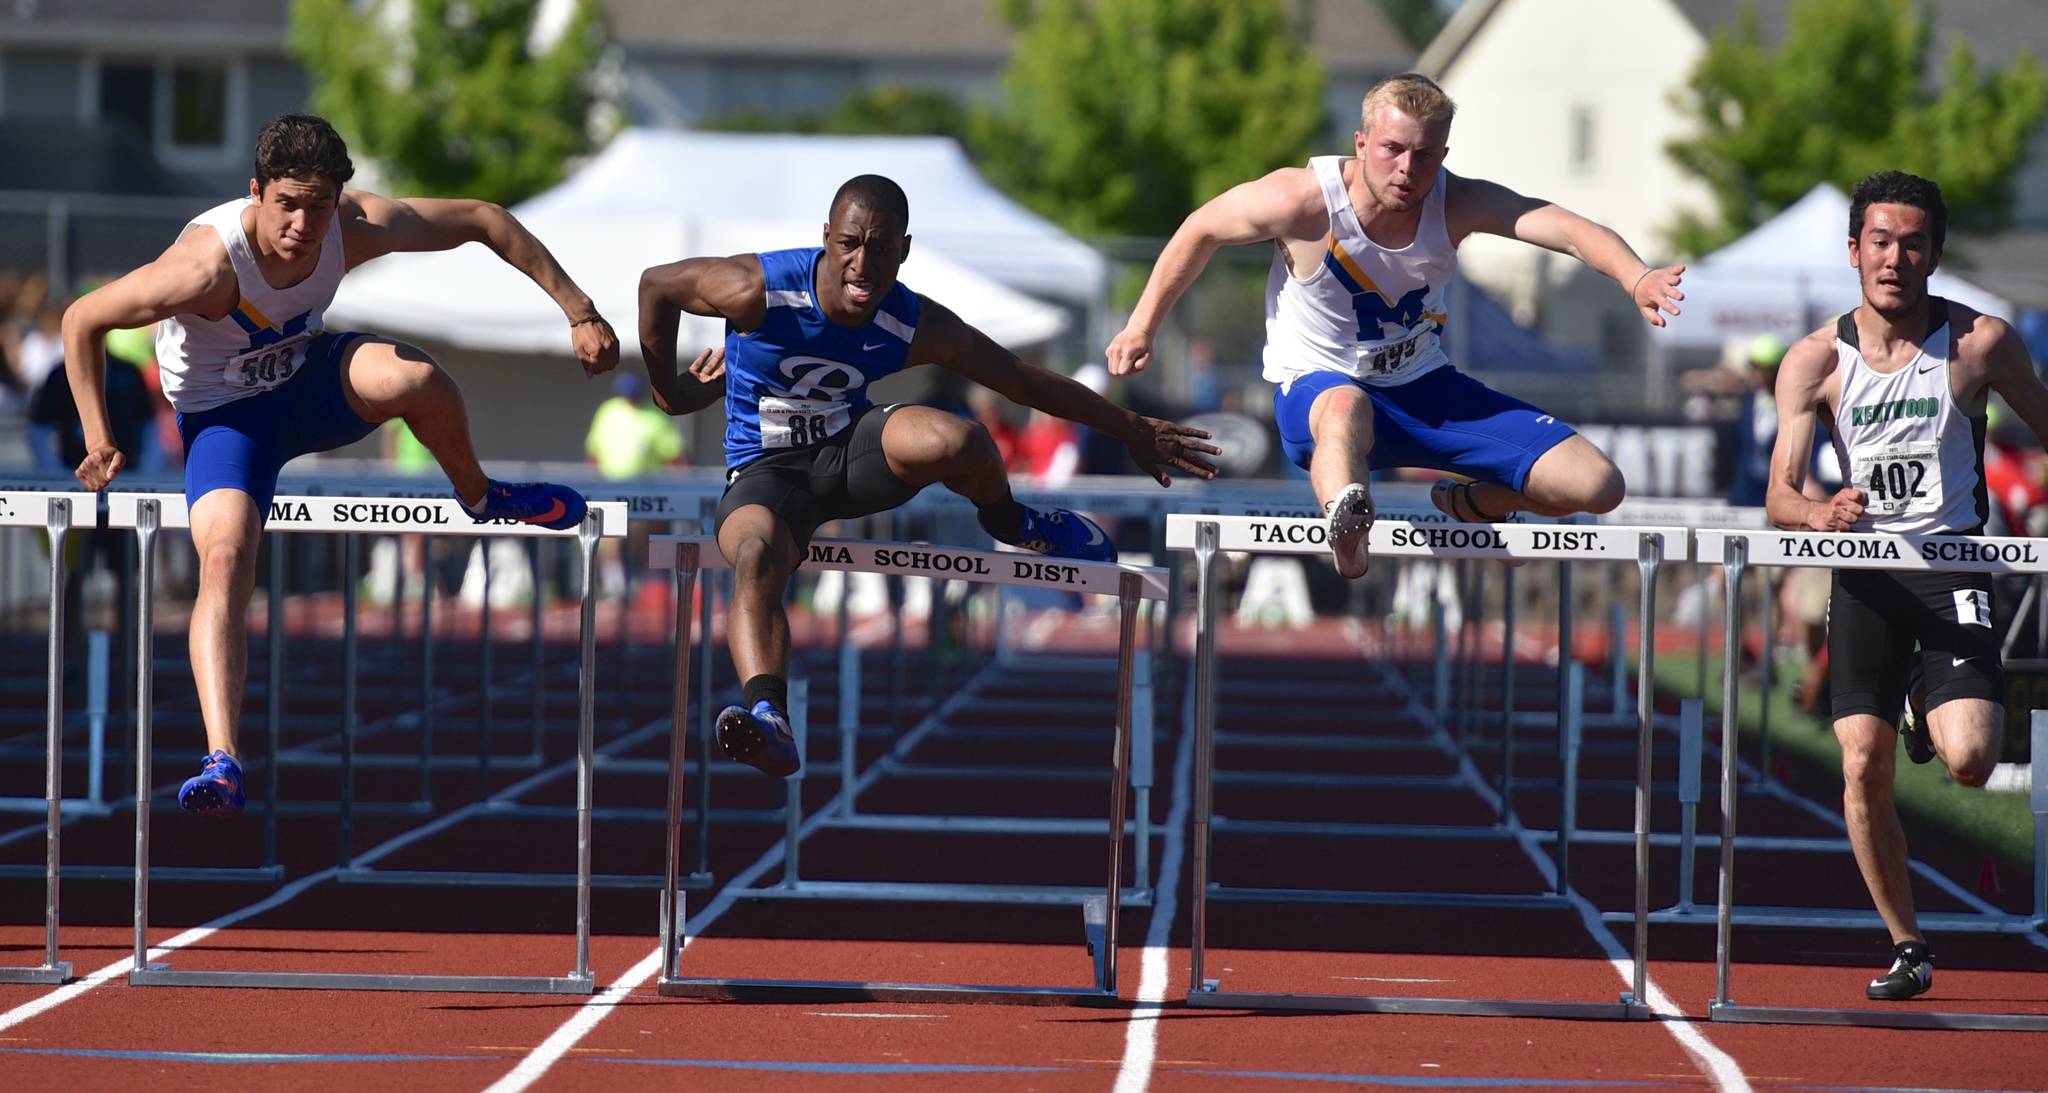 Bothell’s Ford snags second in state hurdles race